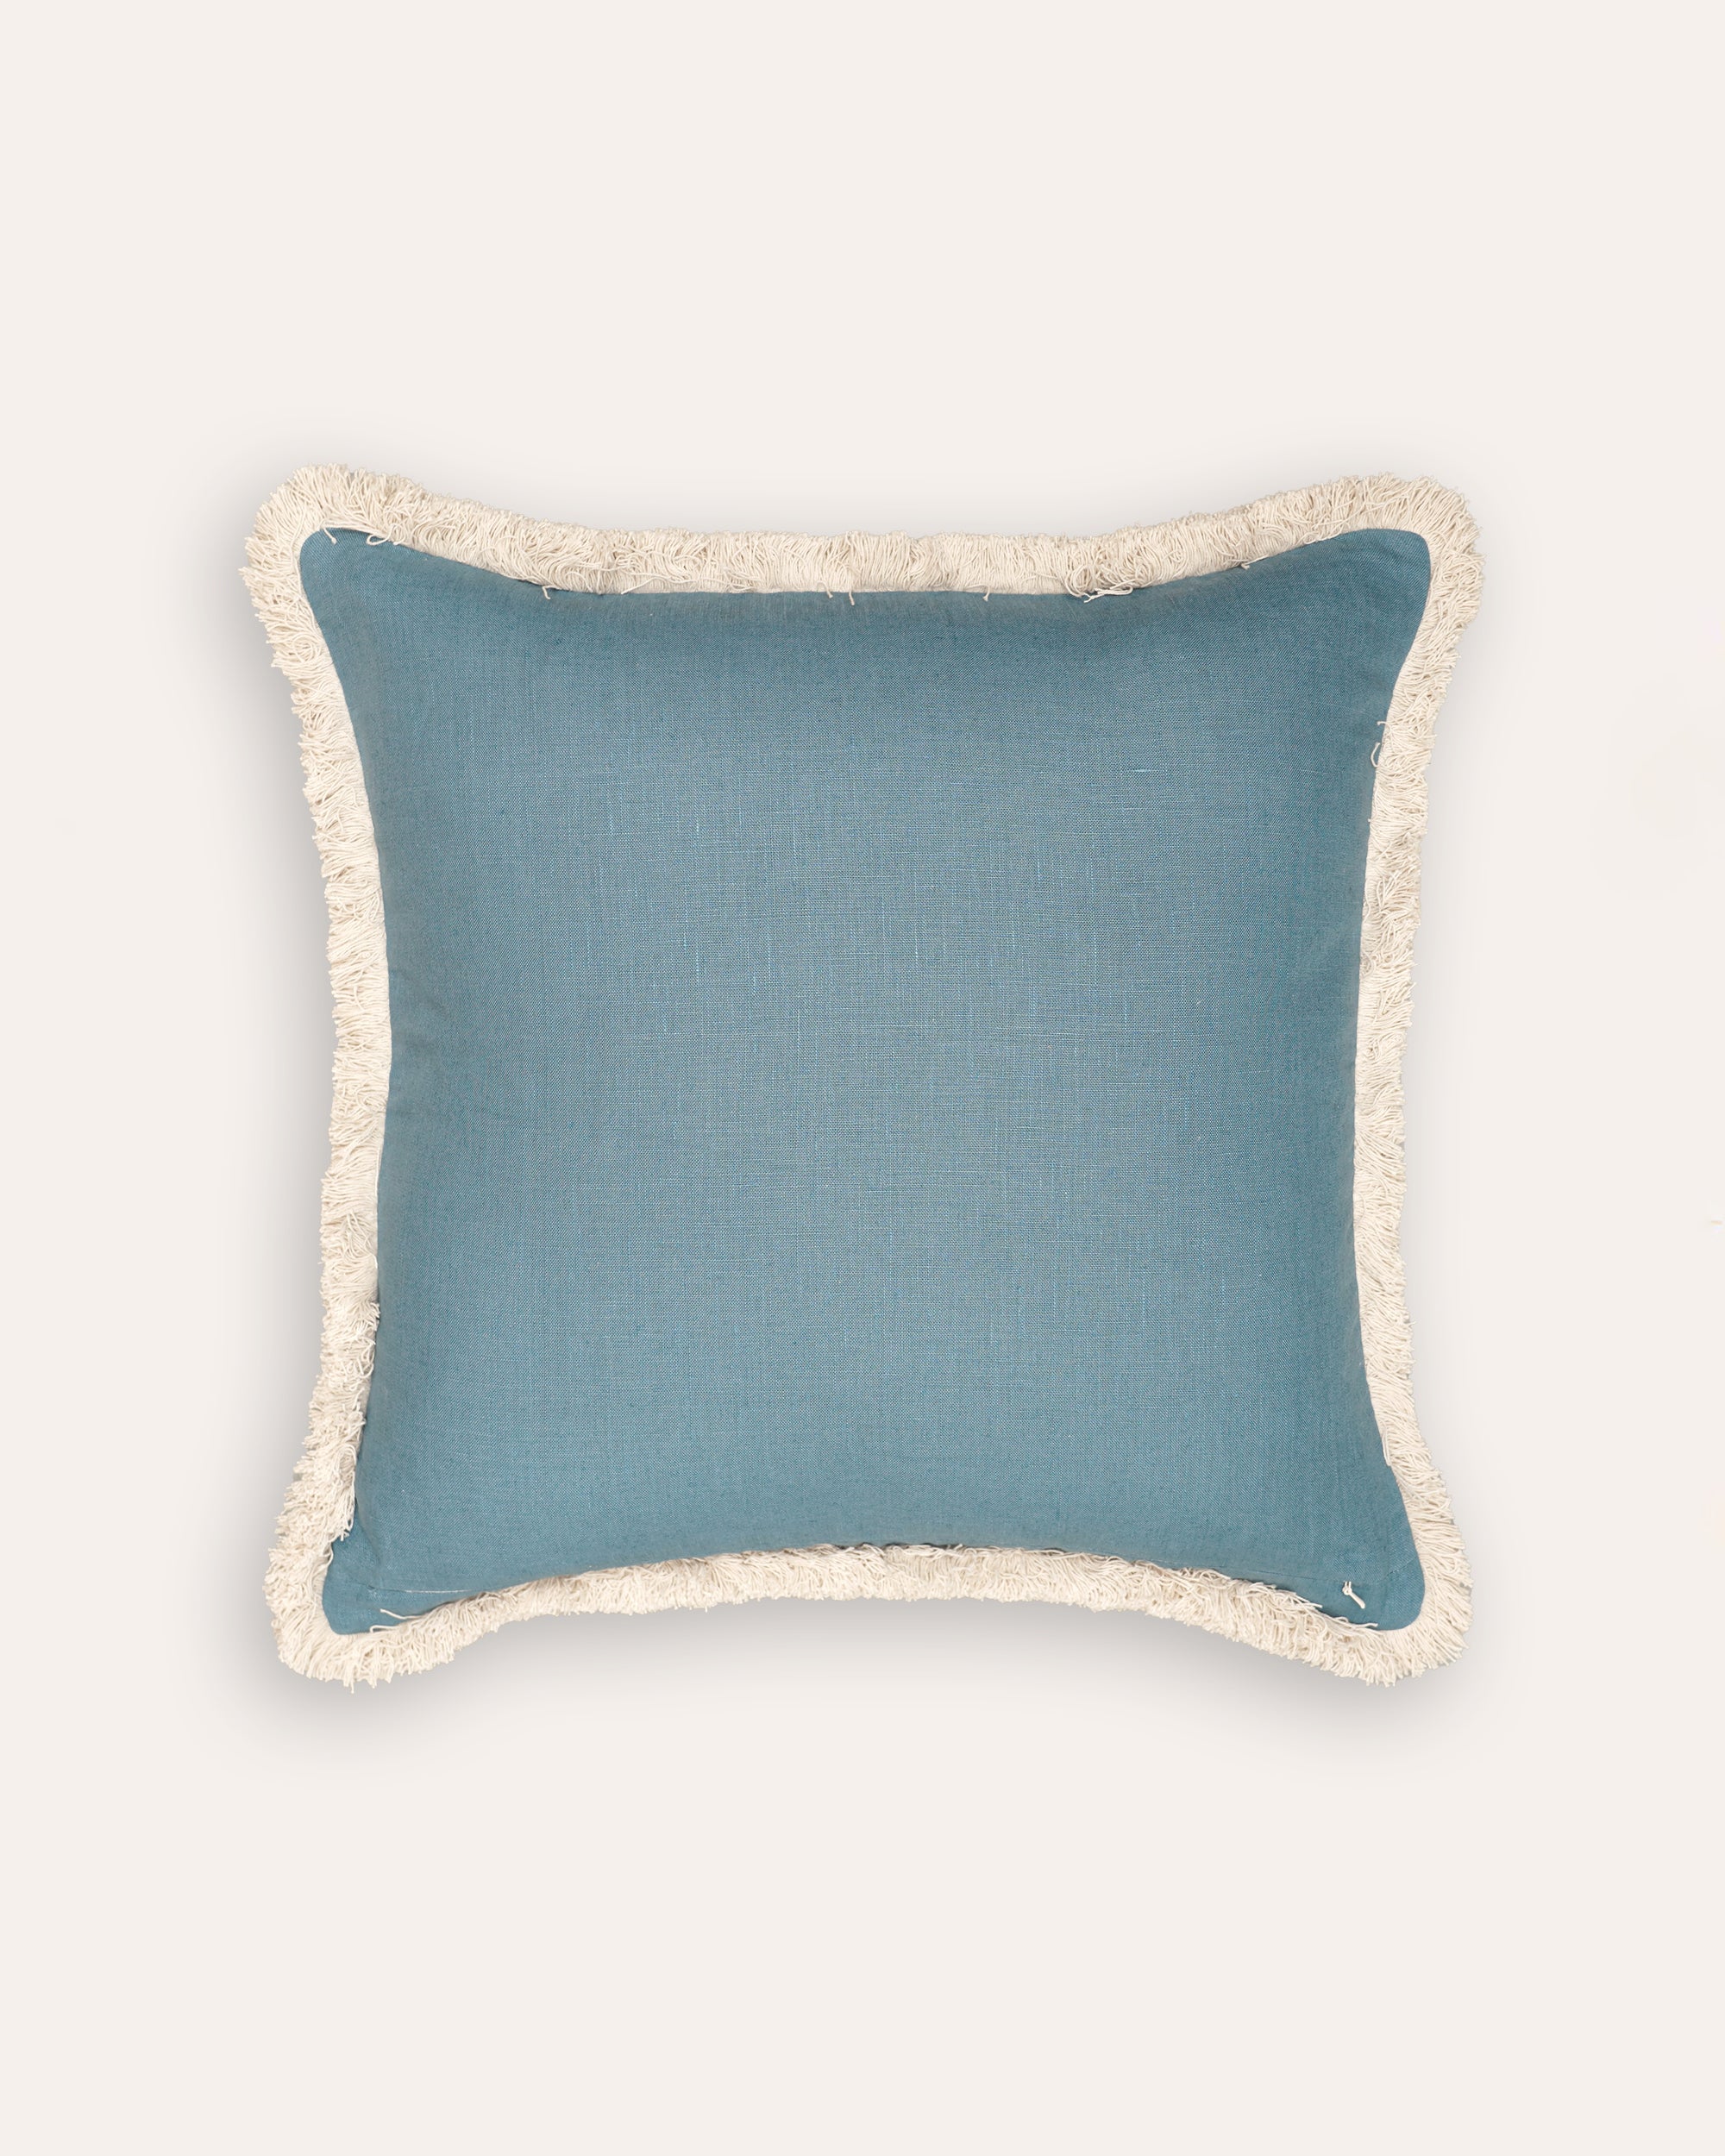 Embroidered Linen Cushion - Blue